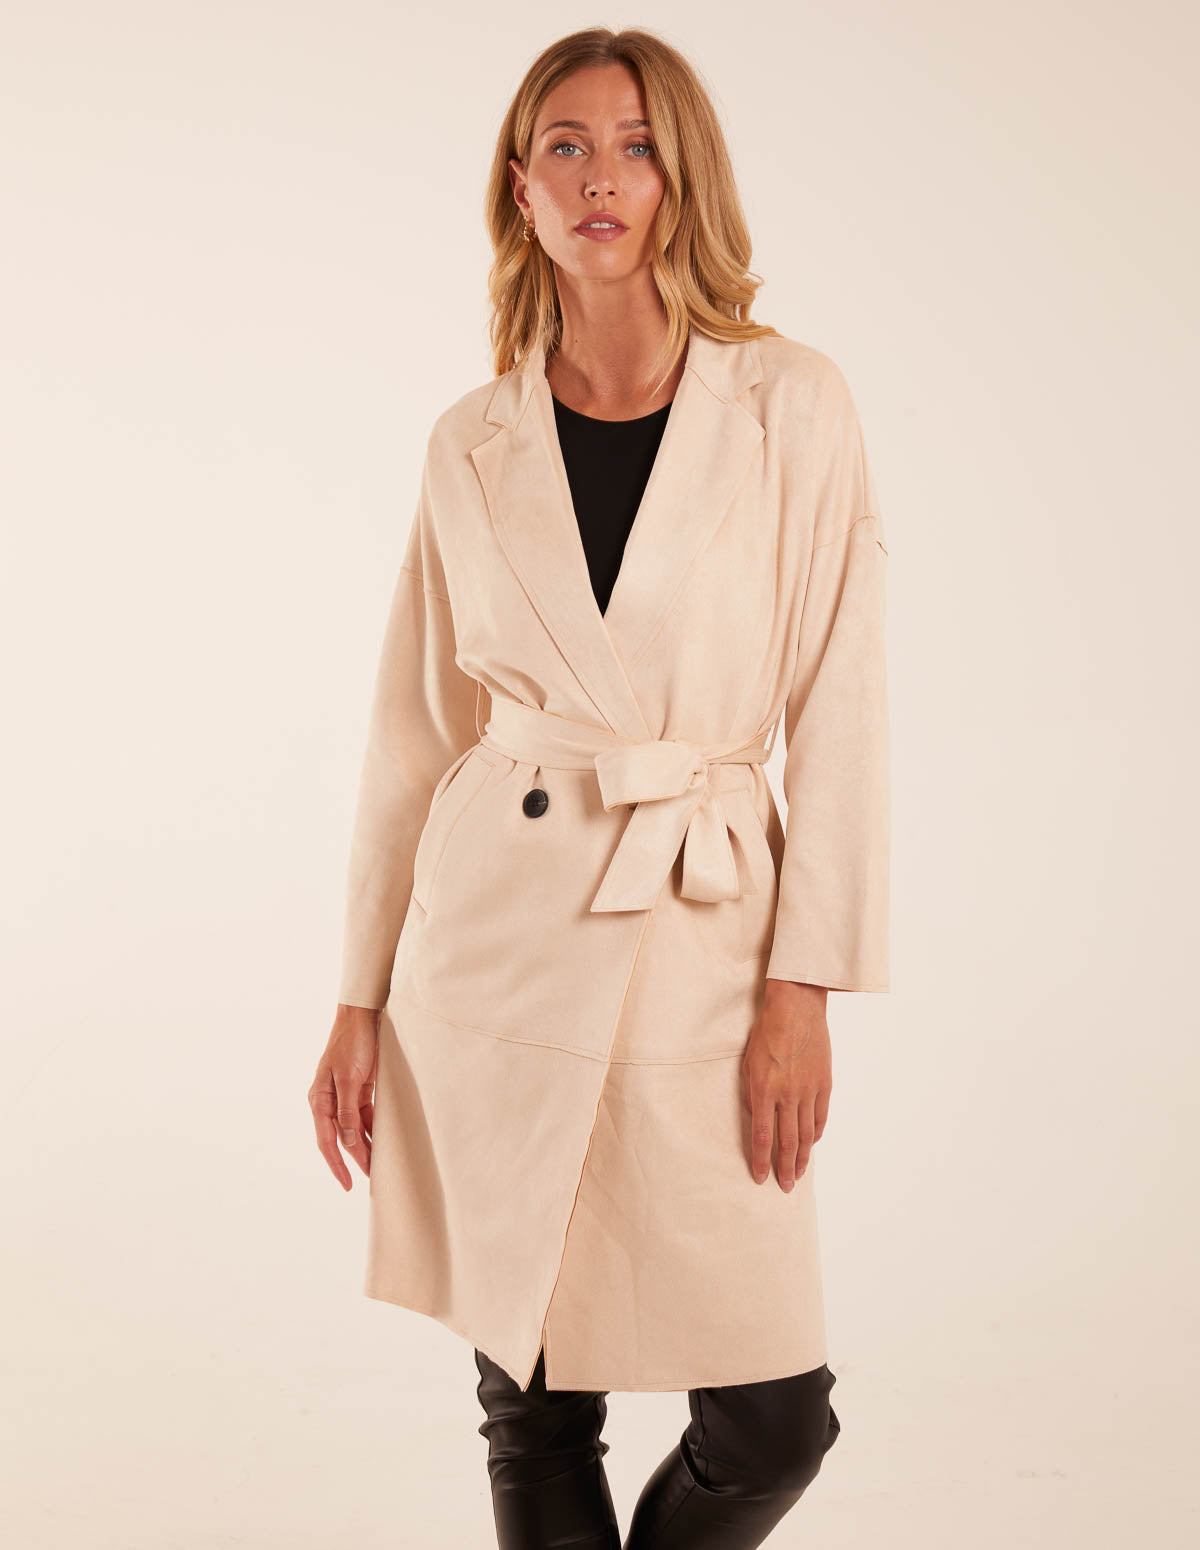 Waist Detail Trench Style Jacket 